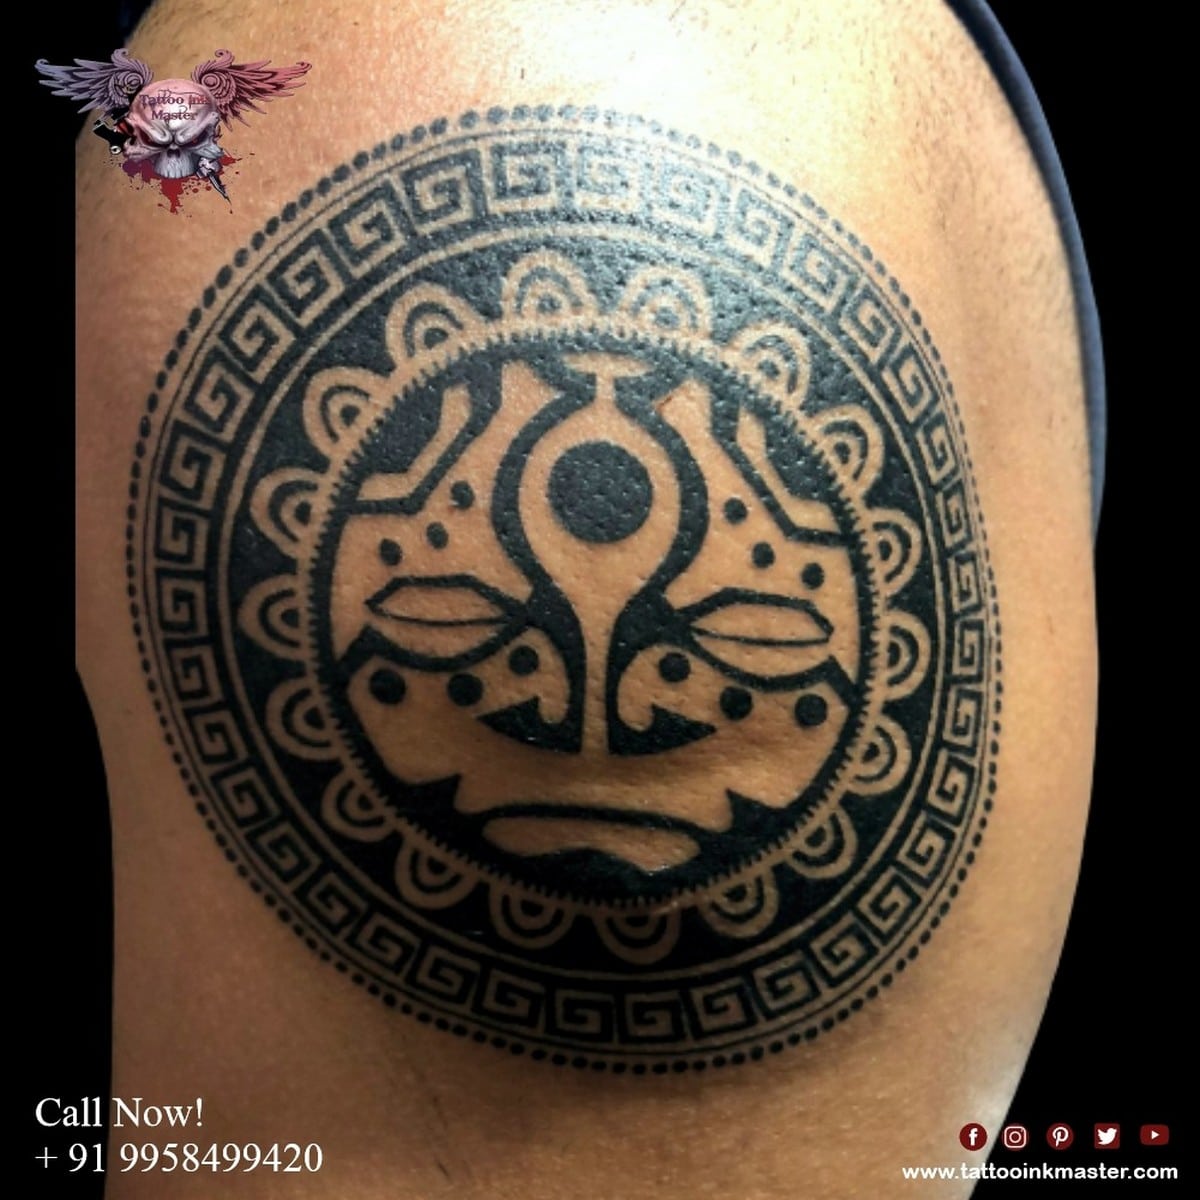 Geometric fineline tattoo with circles, squares, triangles, and lines on  Craiyon